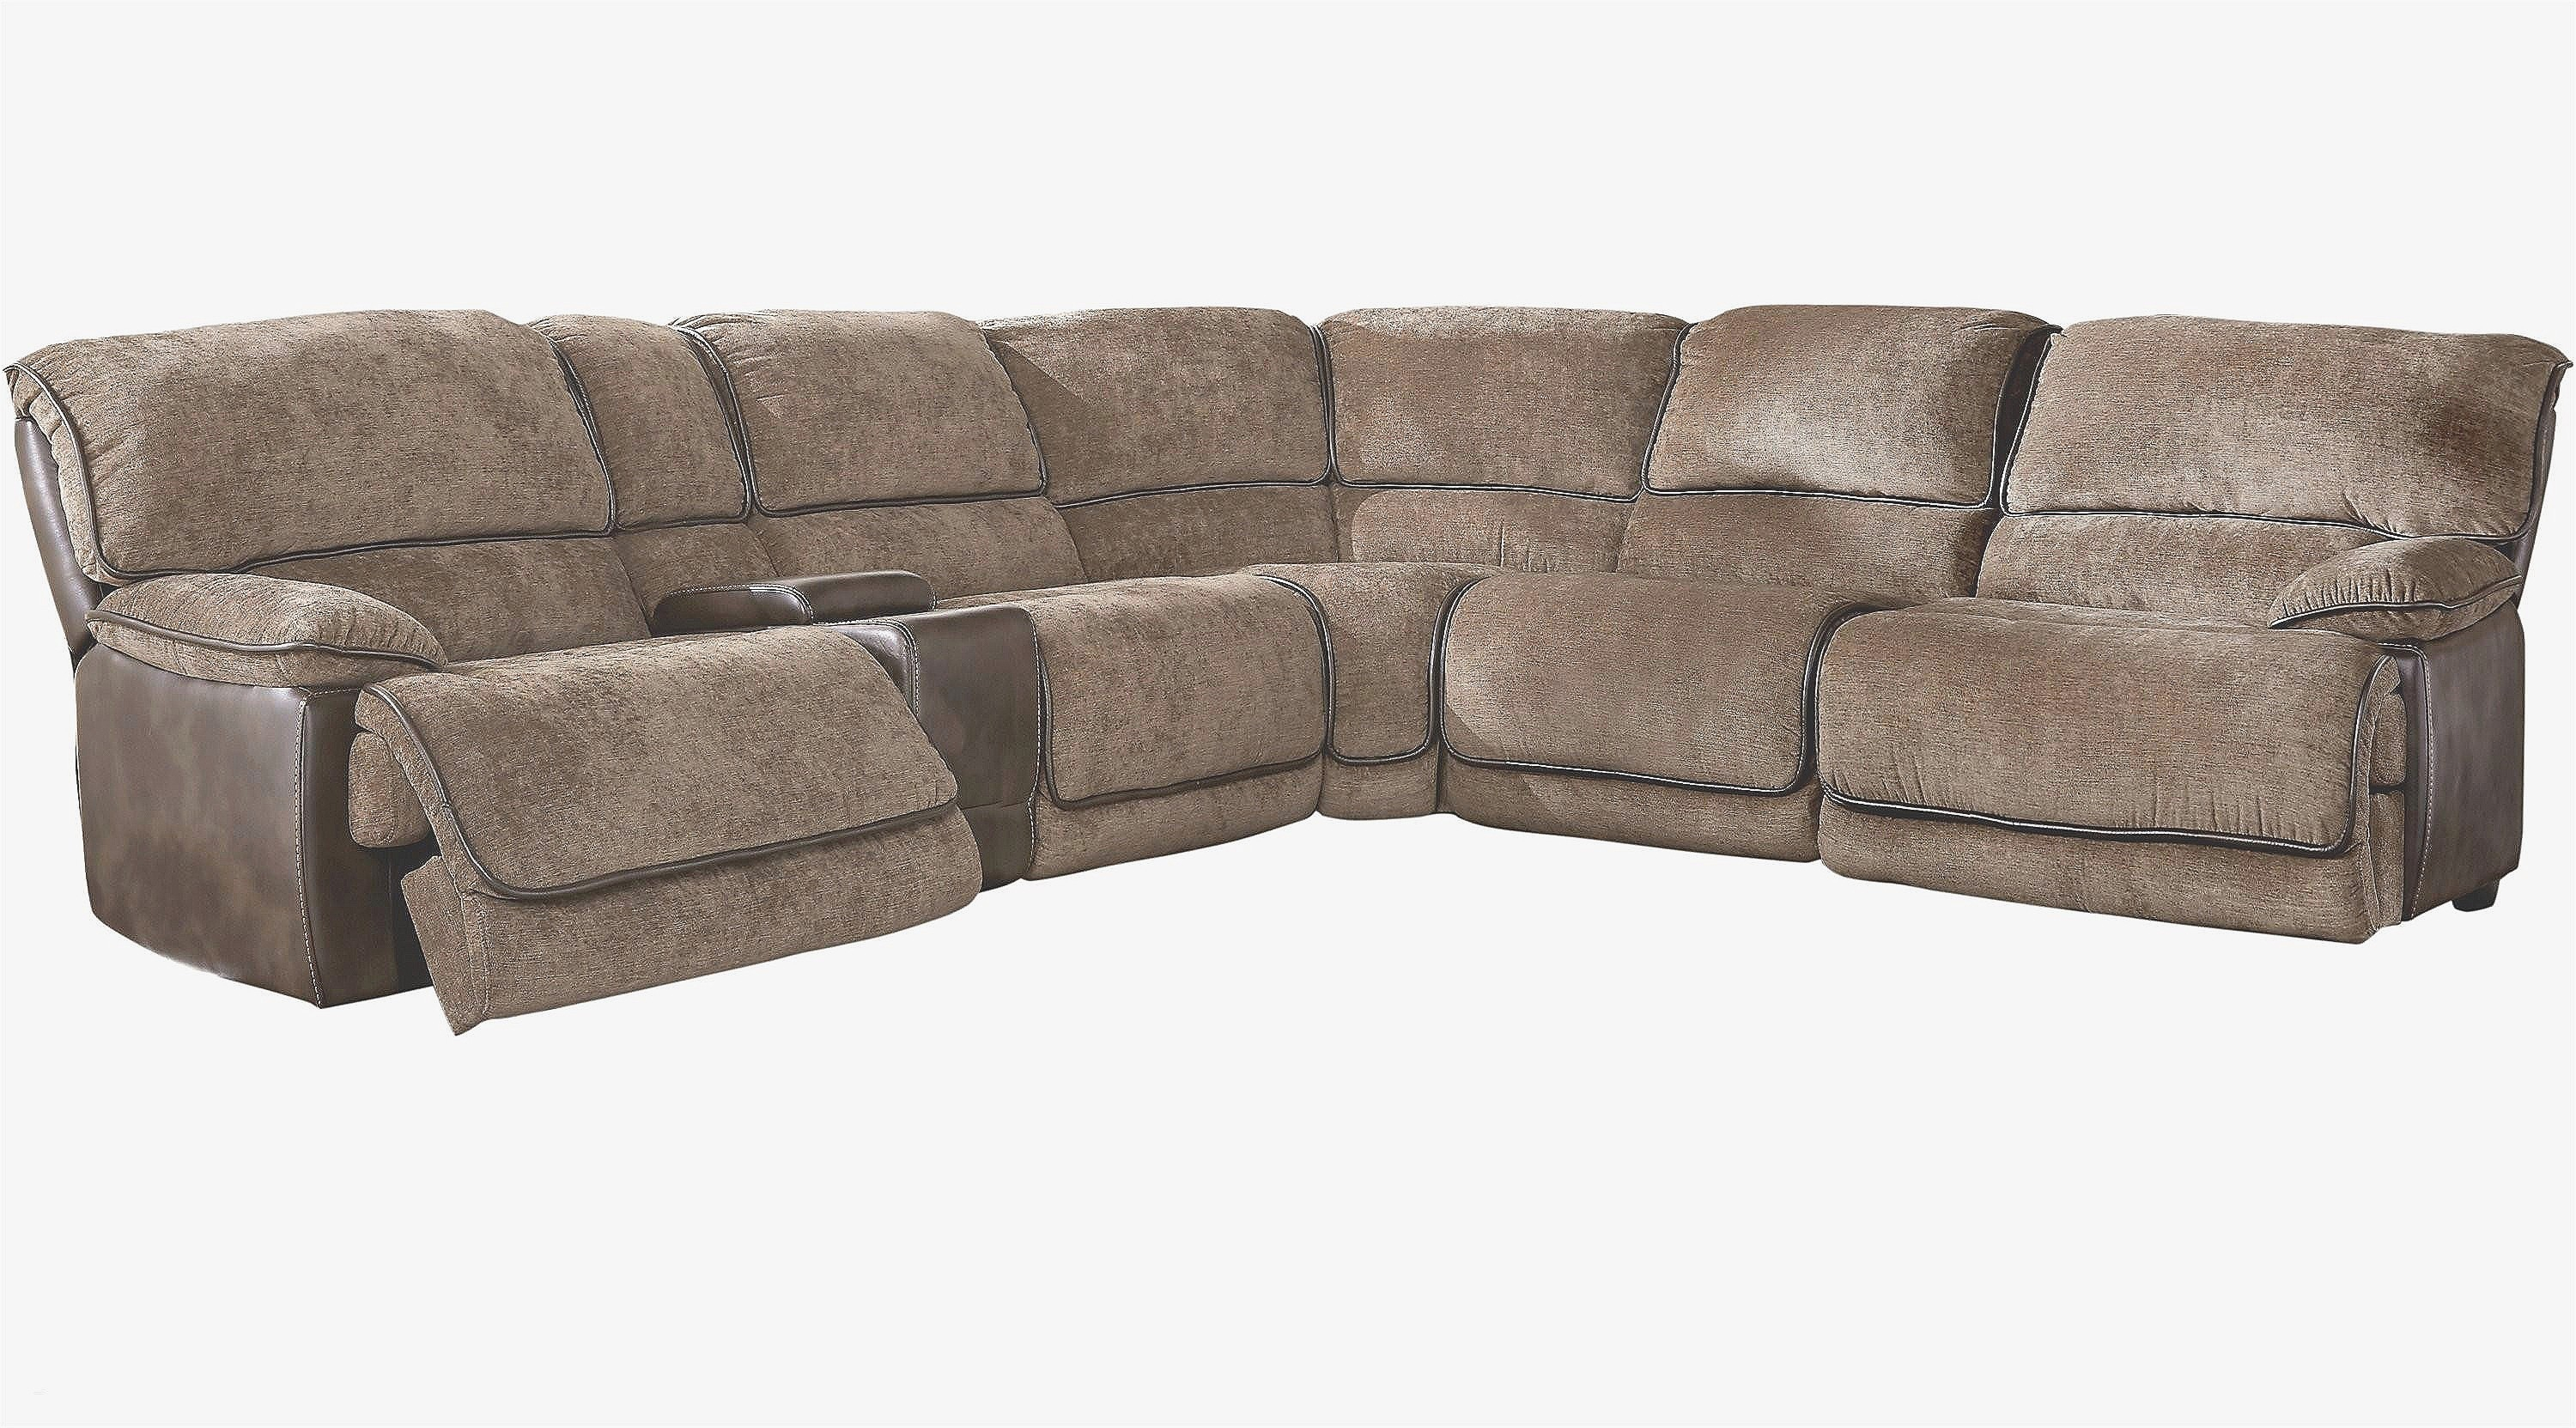 jcpenney furniture sofa beds